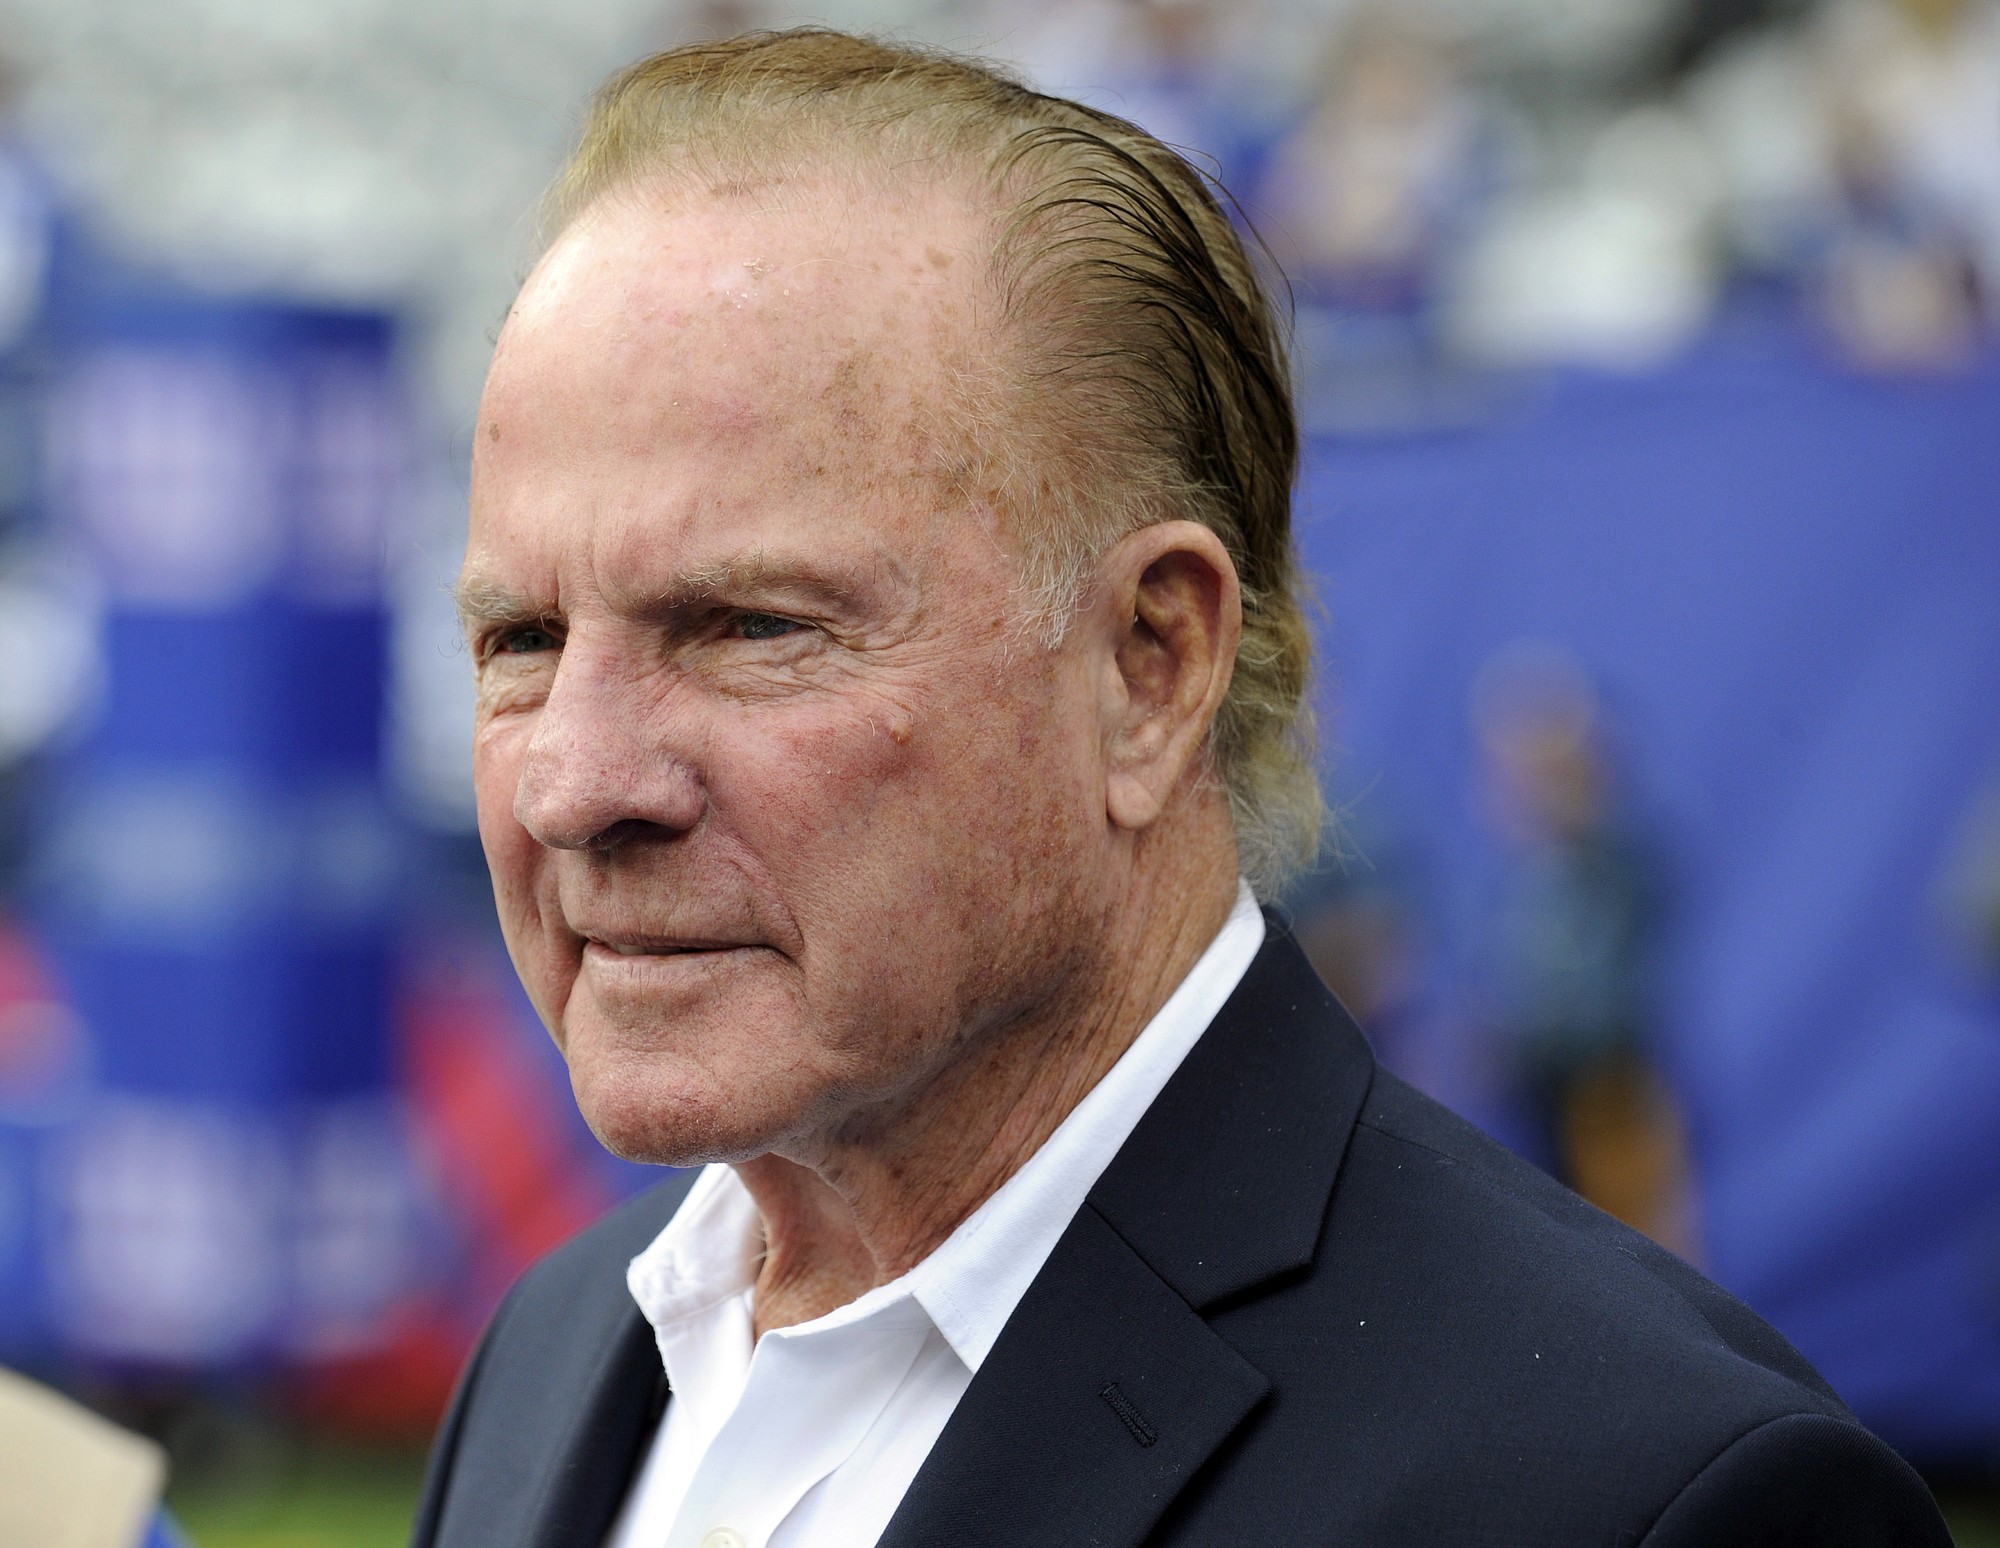 Former New York Giants player and television sports broadcaster Frank Gifford, pictured here in 2013, died on Sunday, Aug. 9, 2015 at his Connecticut home of natural causes. He was 84.